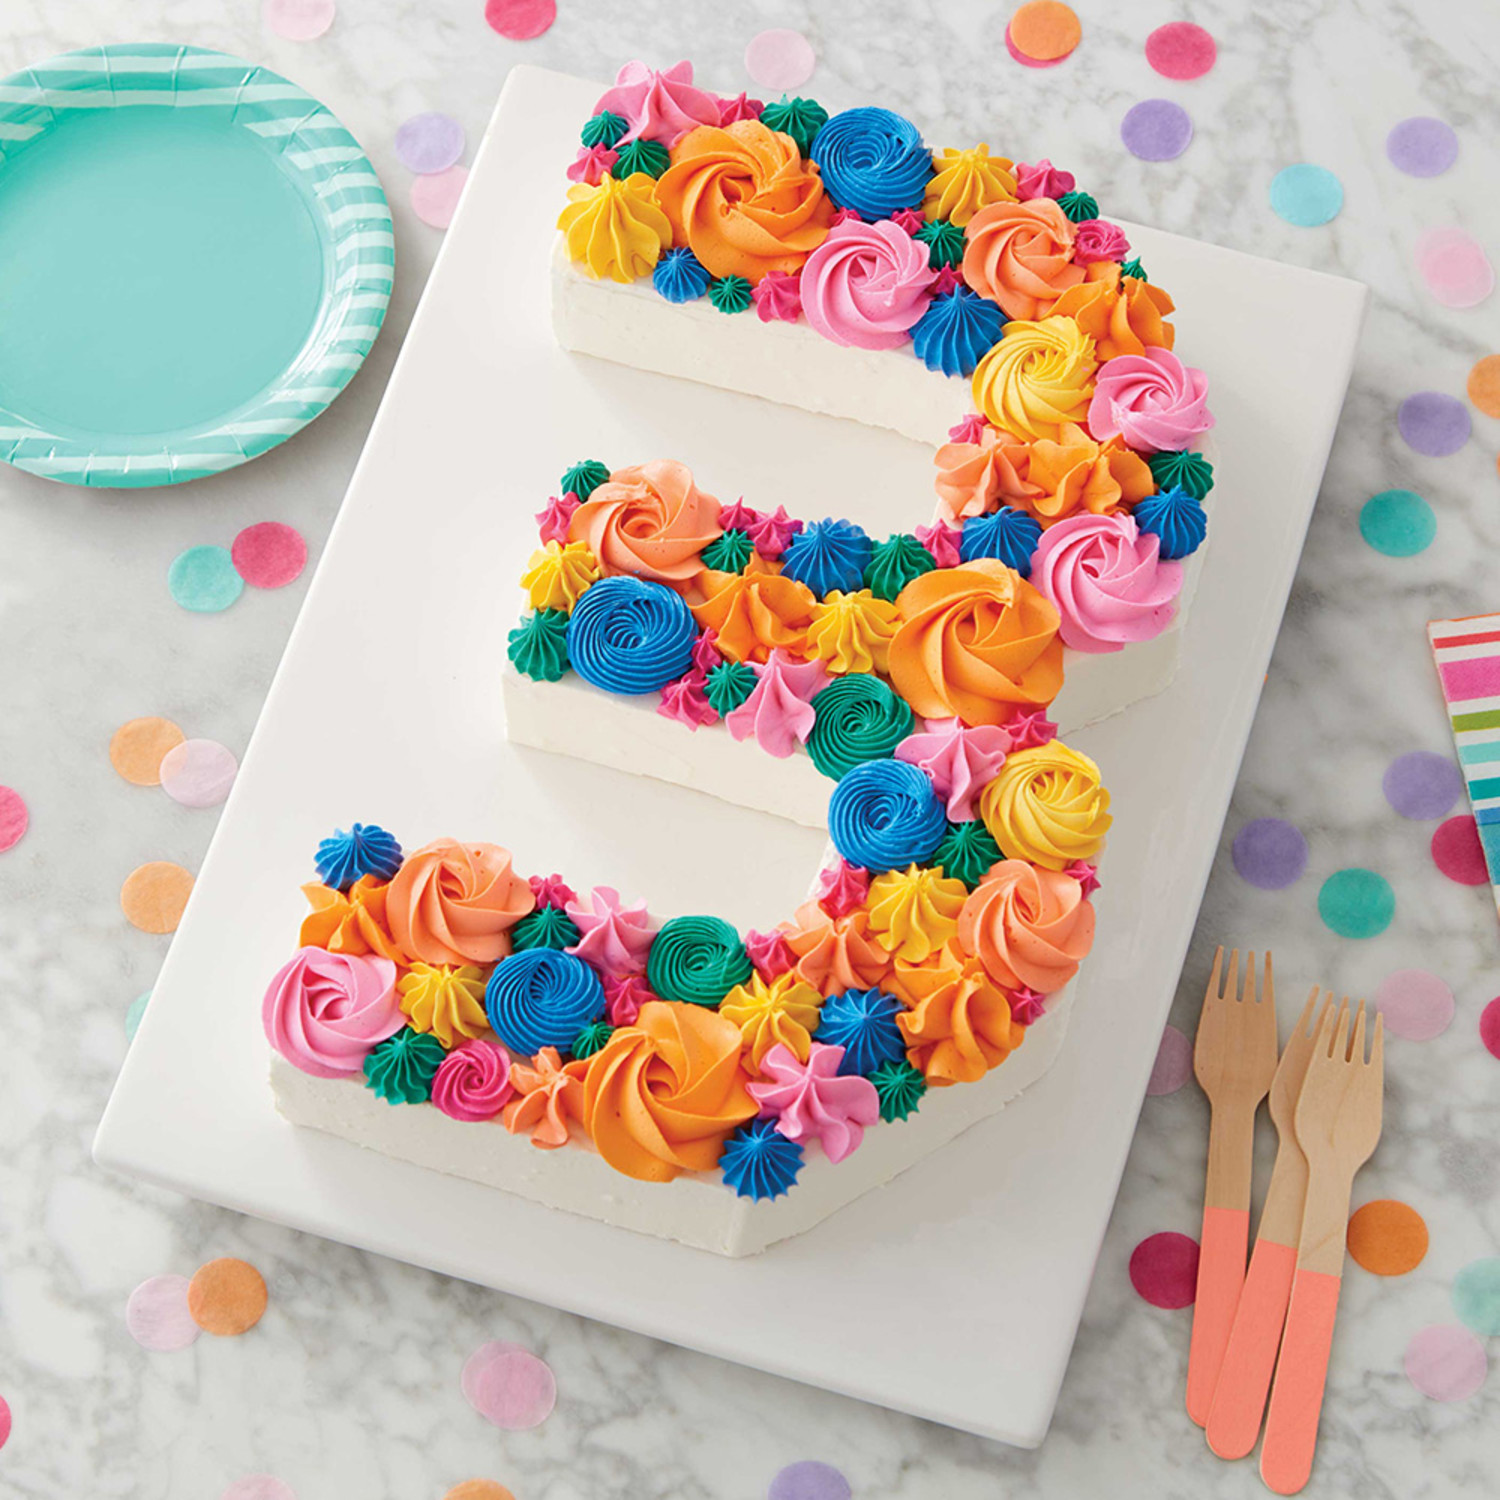 Cake search: Cake details